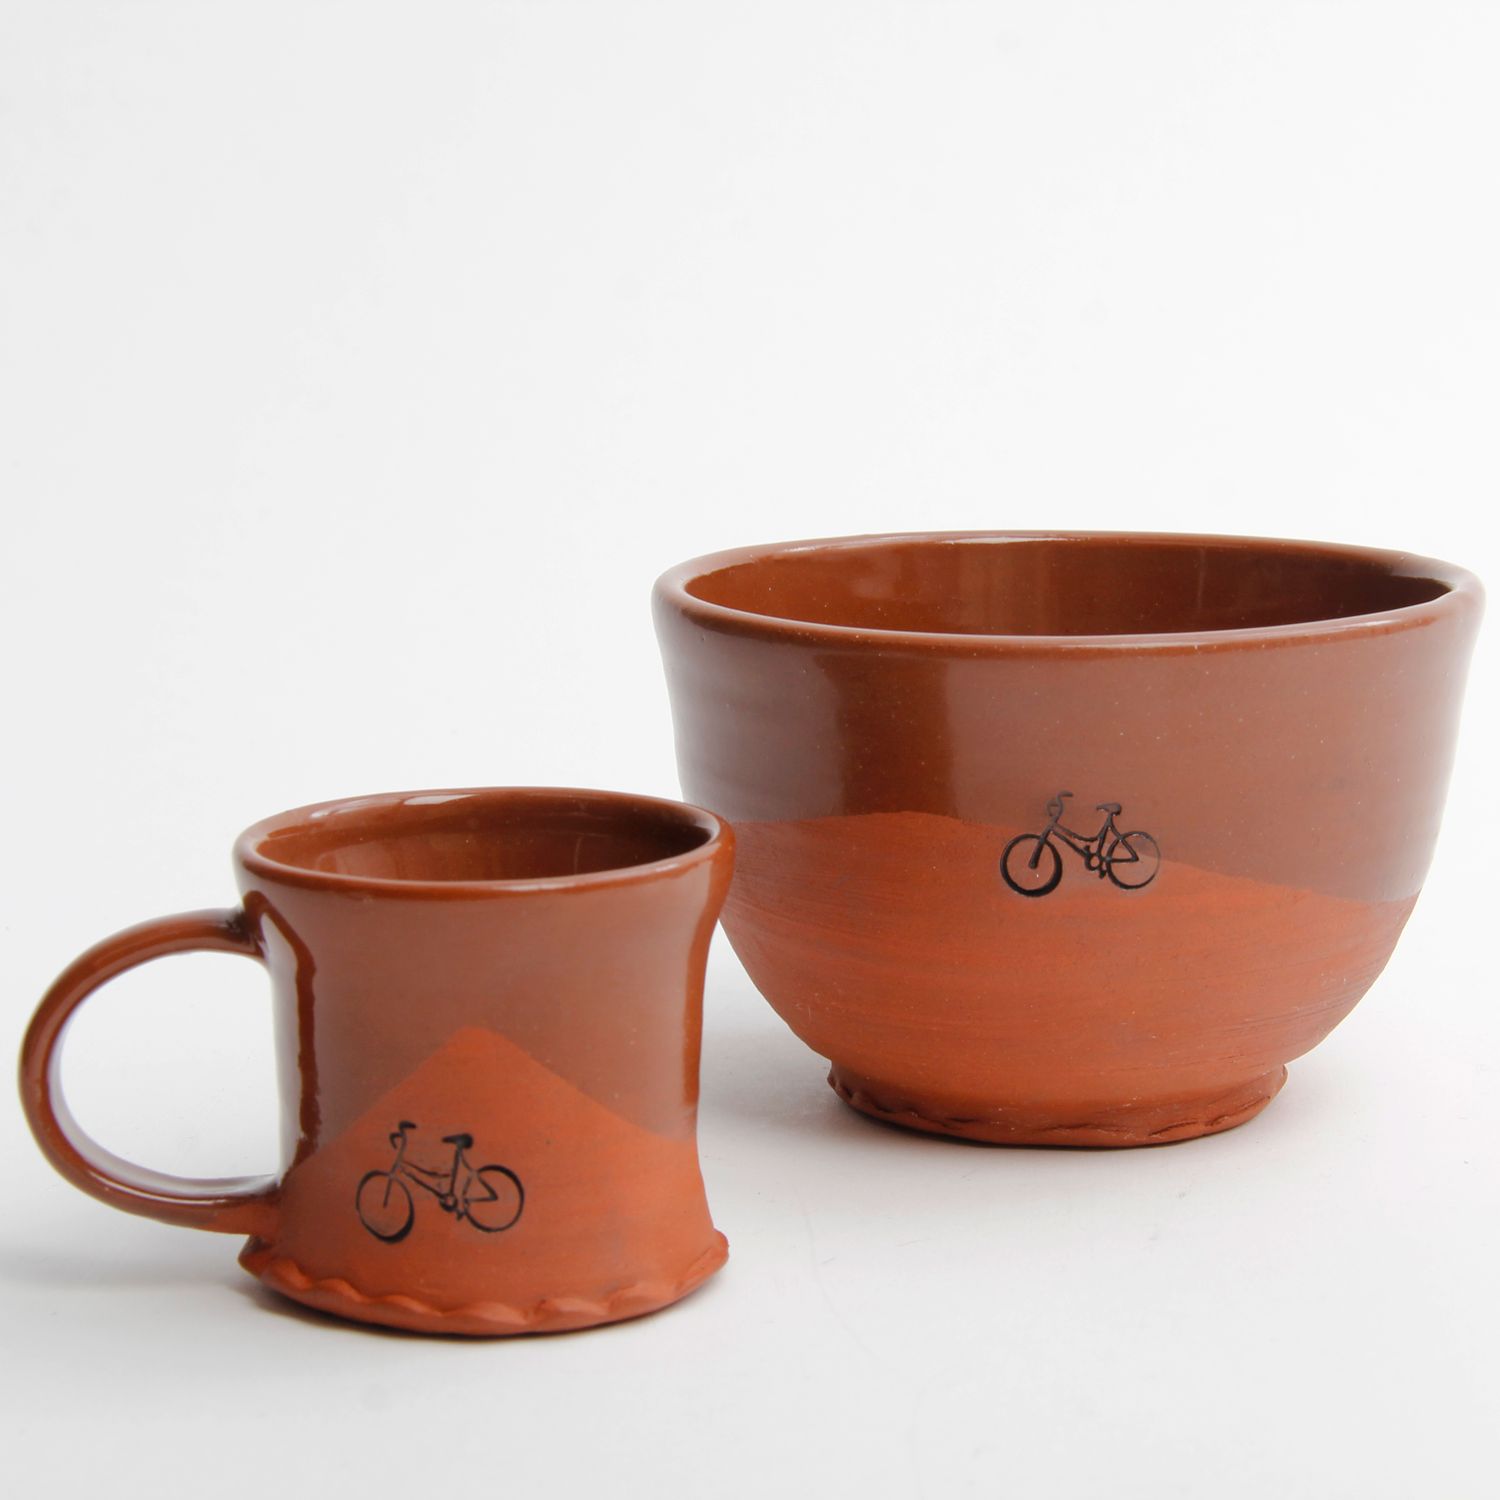 Mary McKenzie: Espresso Cup Brown Product Image 3 of 3